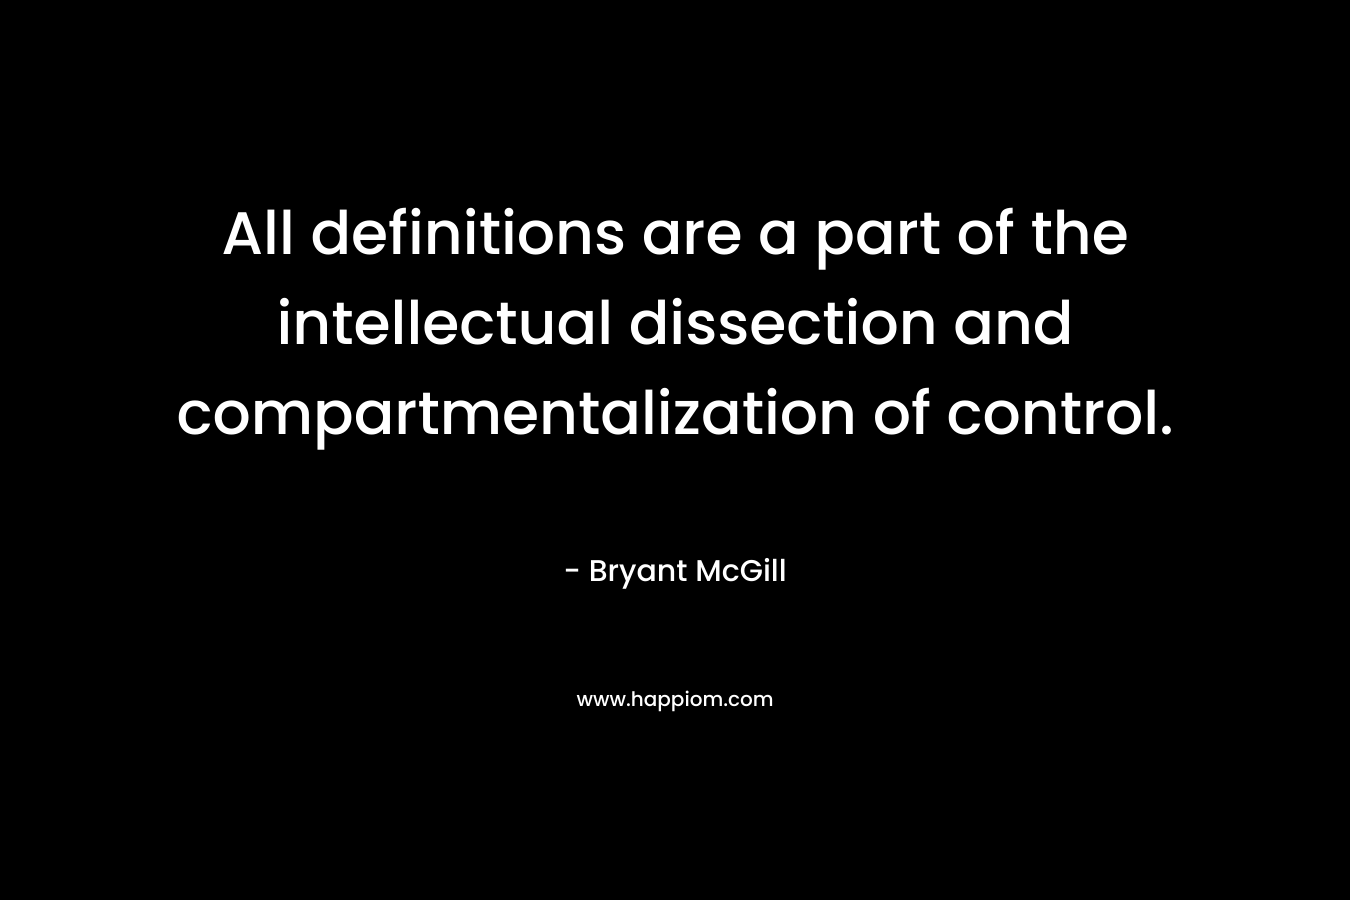 All definitions are a part of the intellectual dissection and compartmentalization of control.